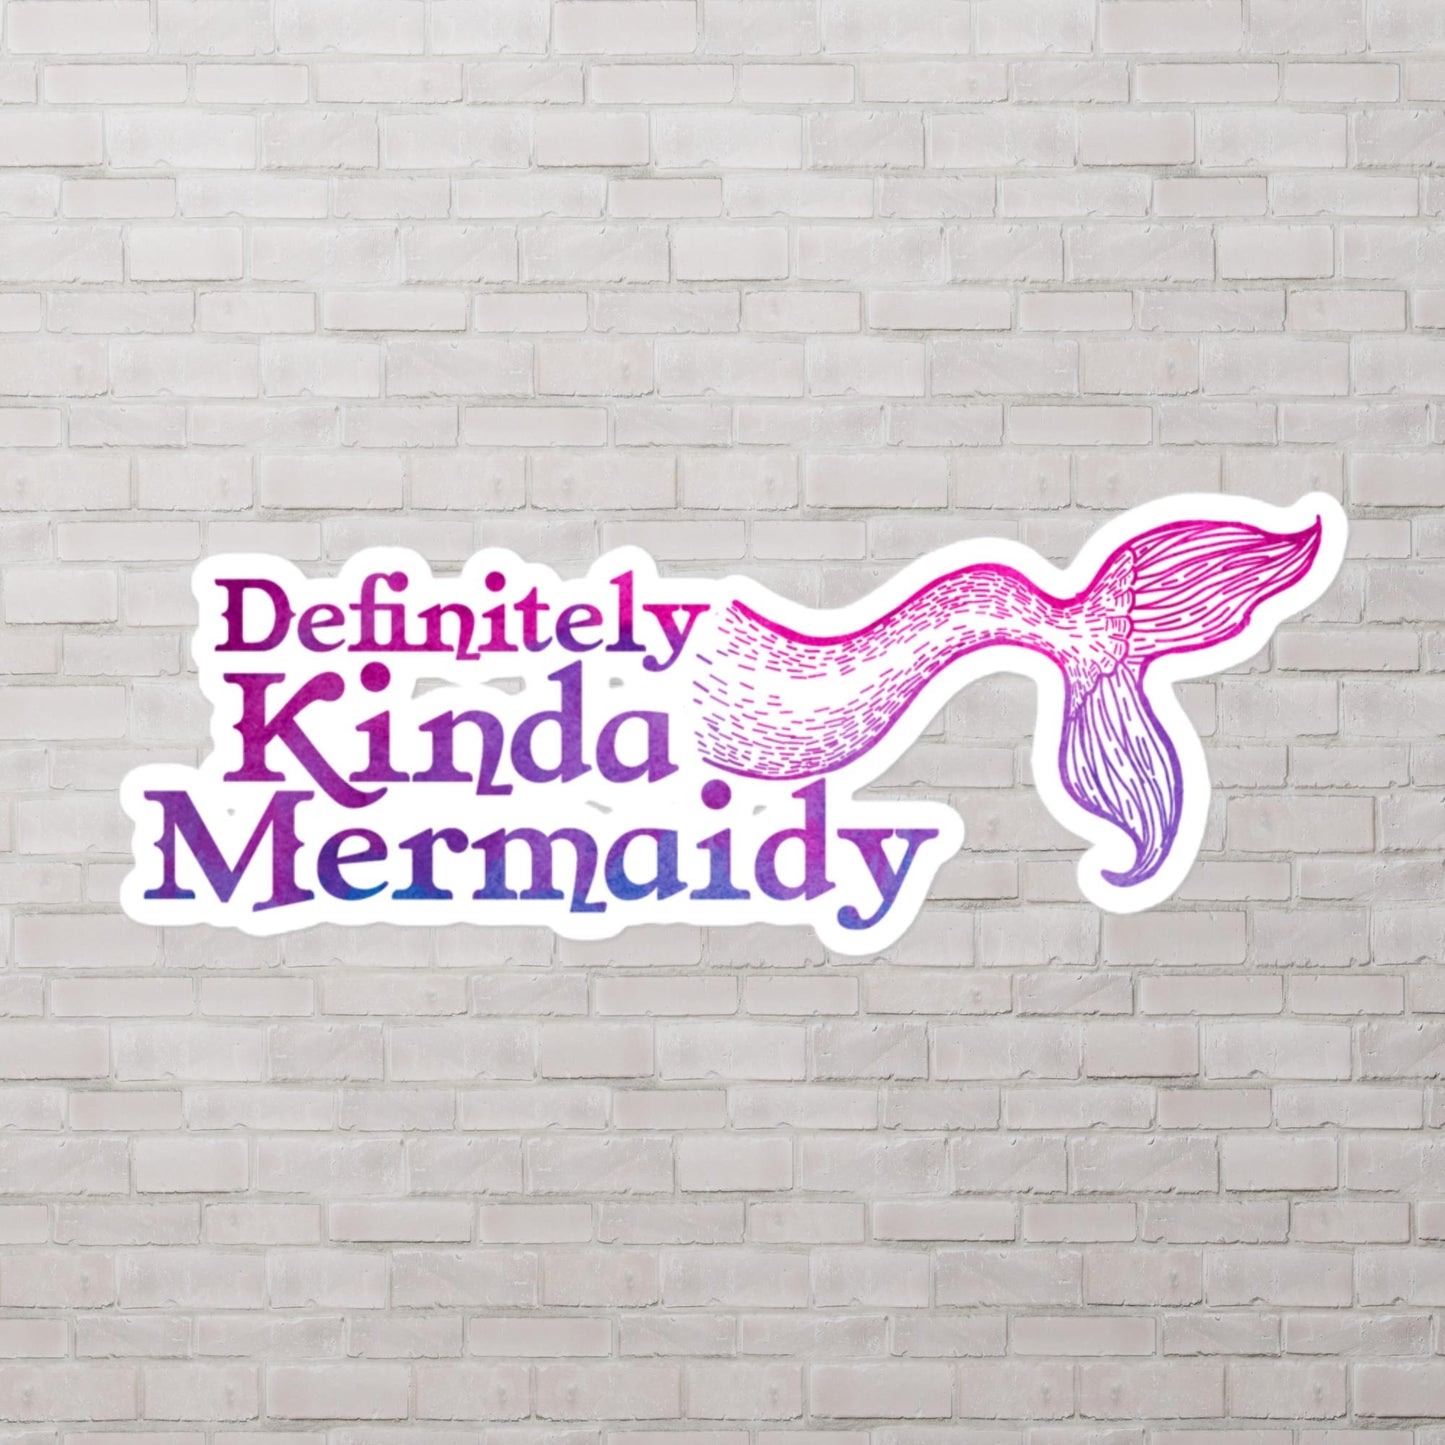 Definitely Kinda Mermaidy OFMD Our Flag Means Death stickers